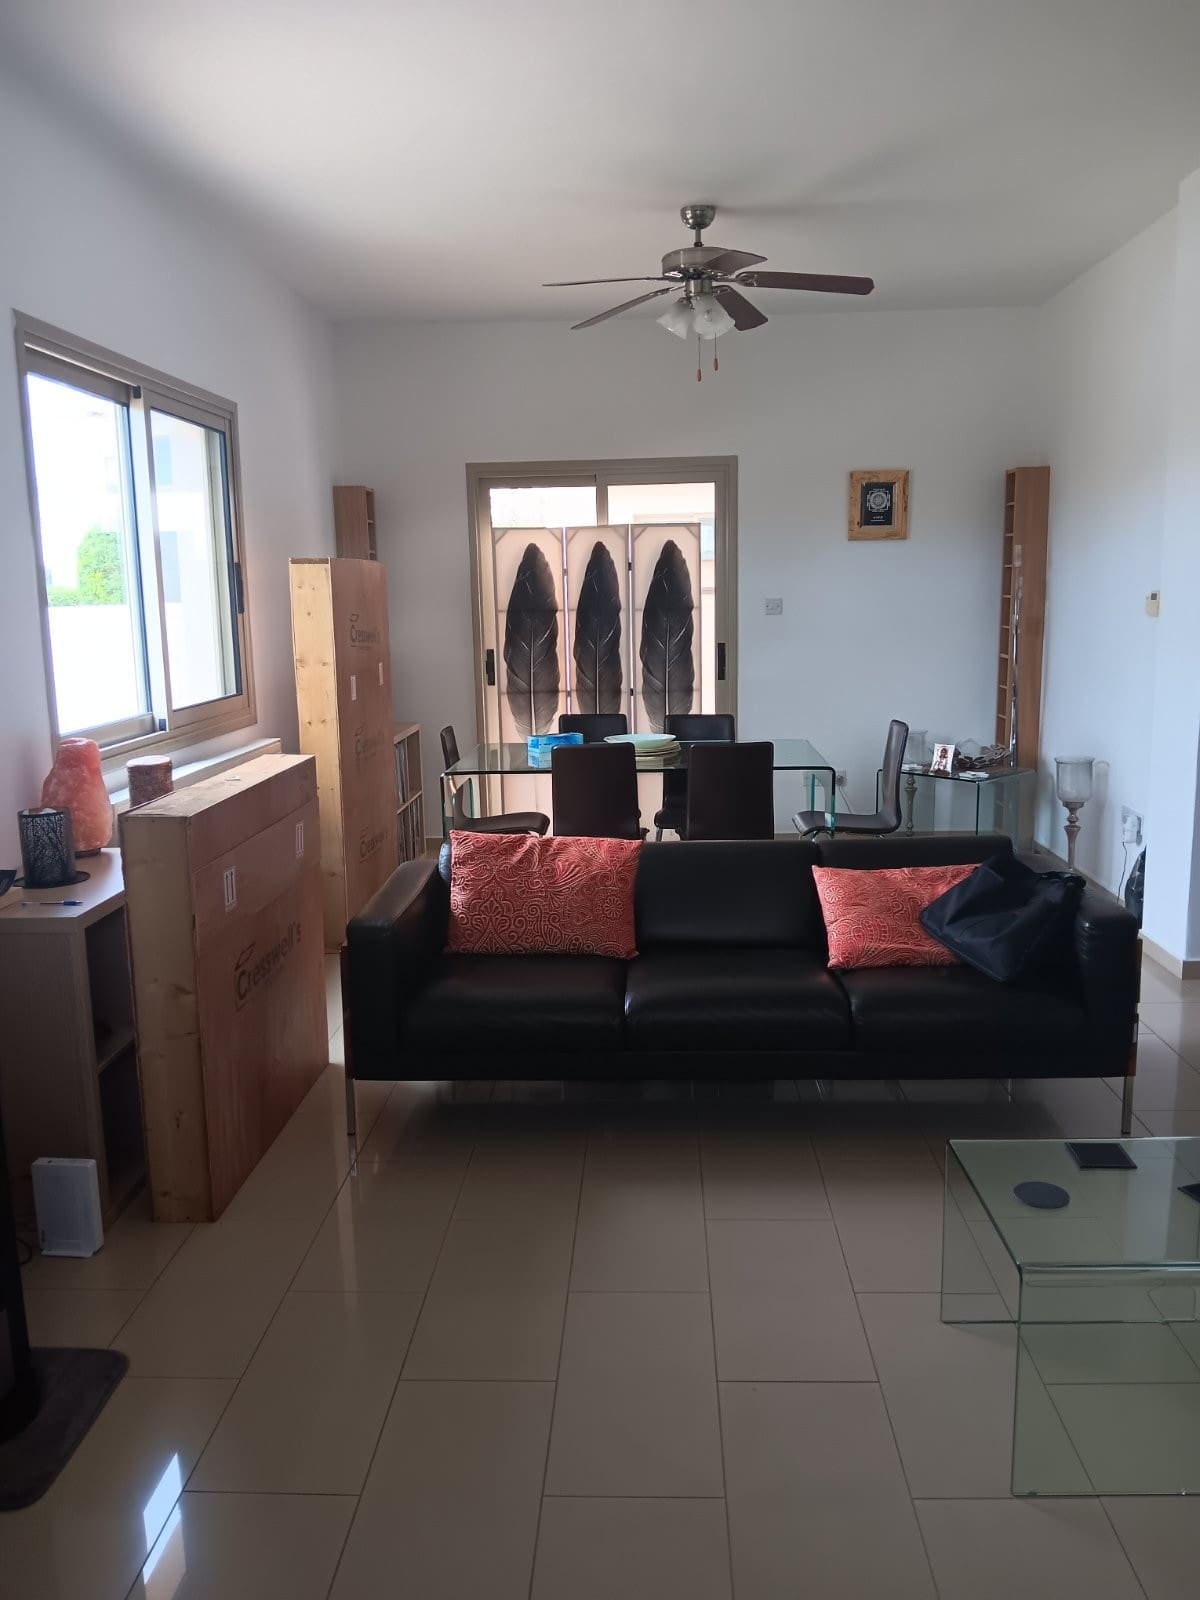 3 Bedroom House for Rent in Konia, Paphos District